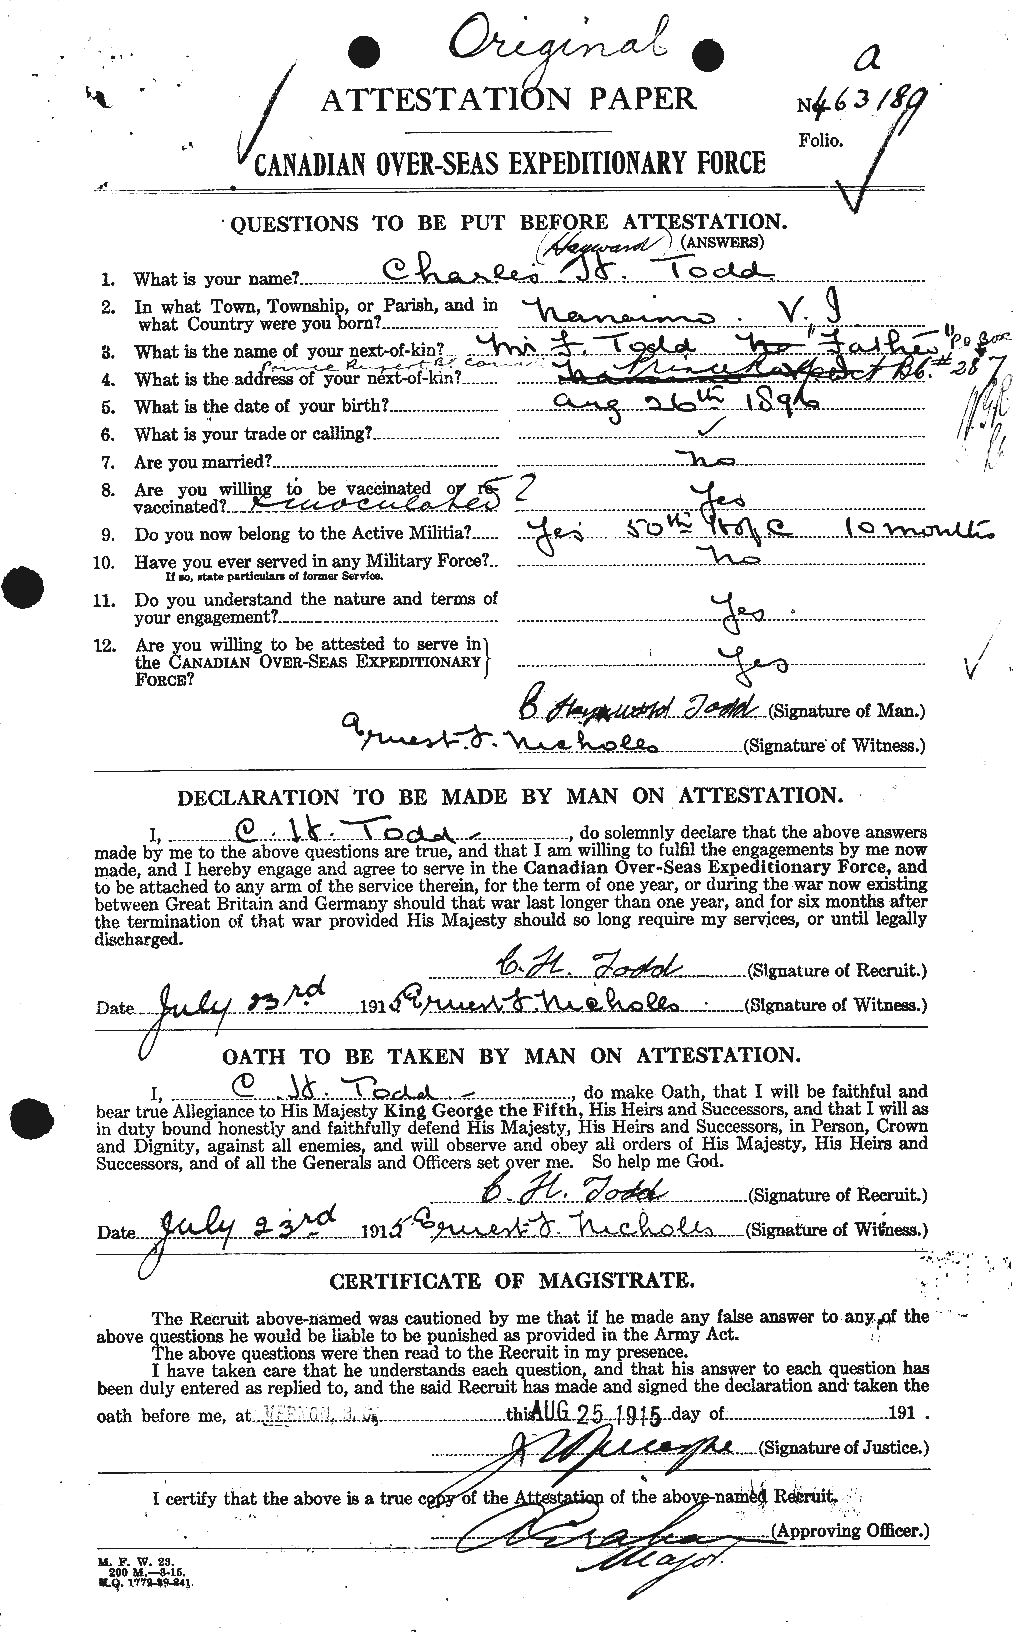 Personnel Records of the First World War - CEF 640679a